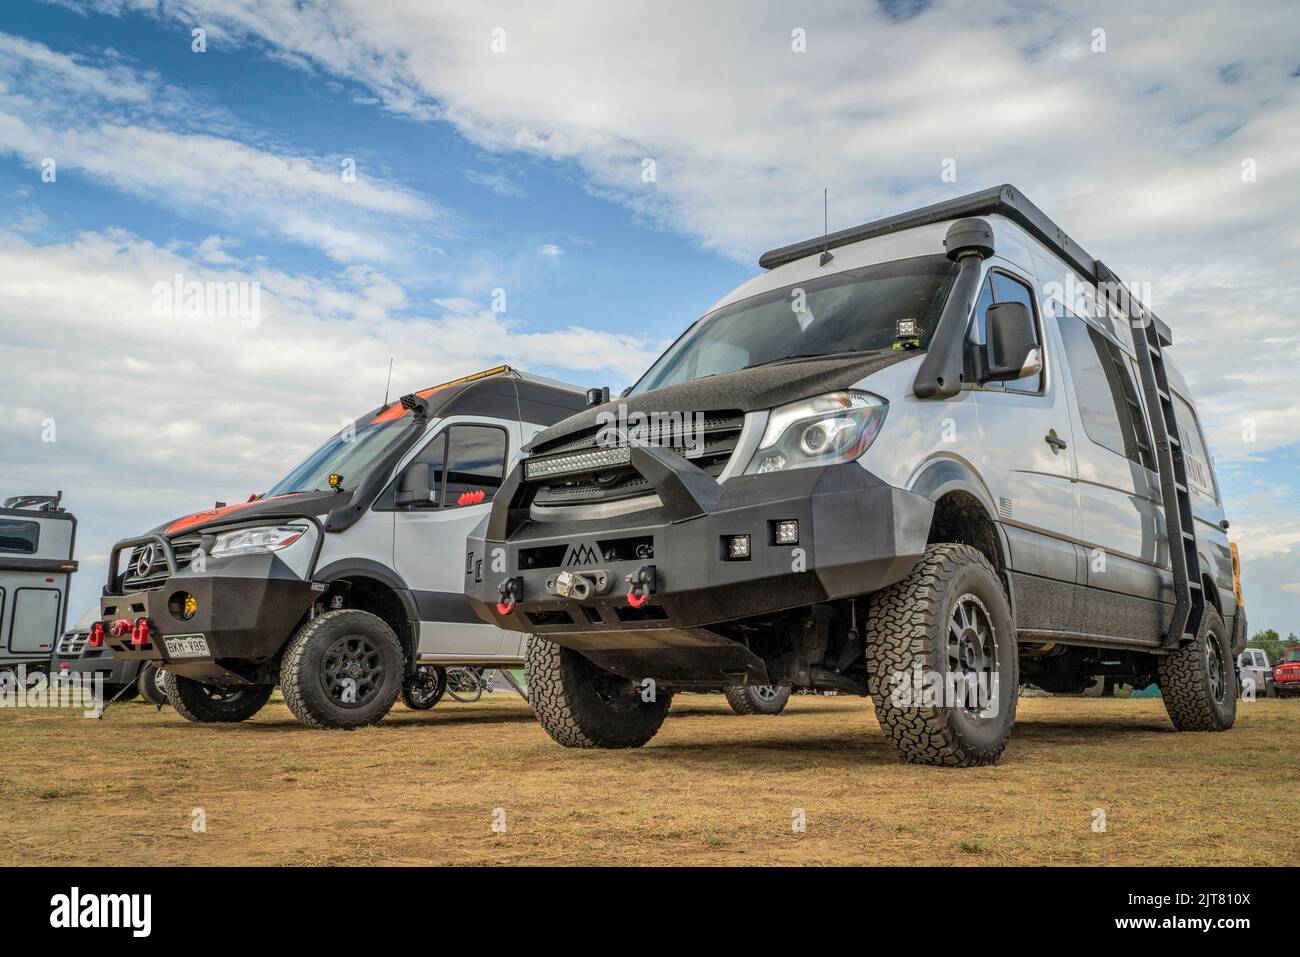 Loveland, CO, USA - August 26, 2022: 4x4 camper vans on Mercedes Sprinter chassis with upgraded suspension and front bumpers for off-road overlanding. Stock Photo